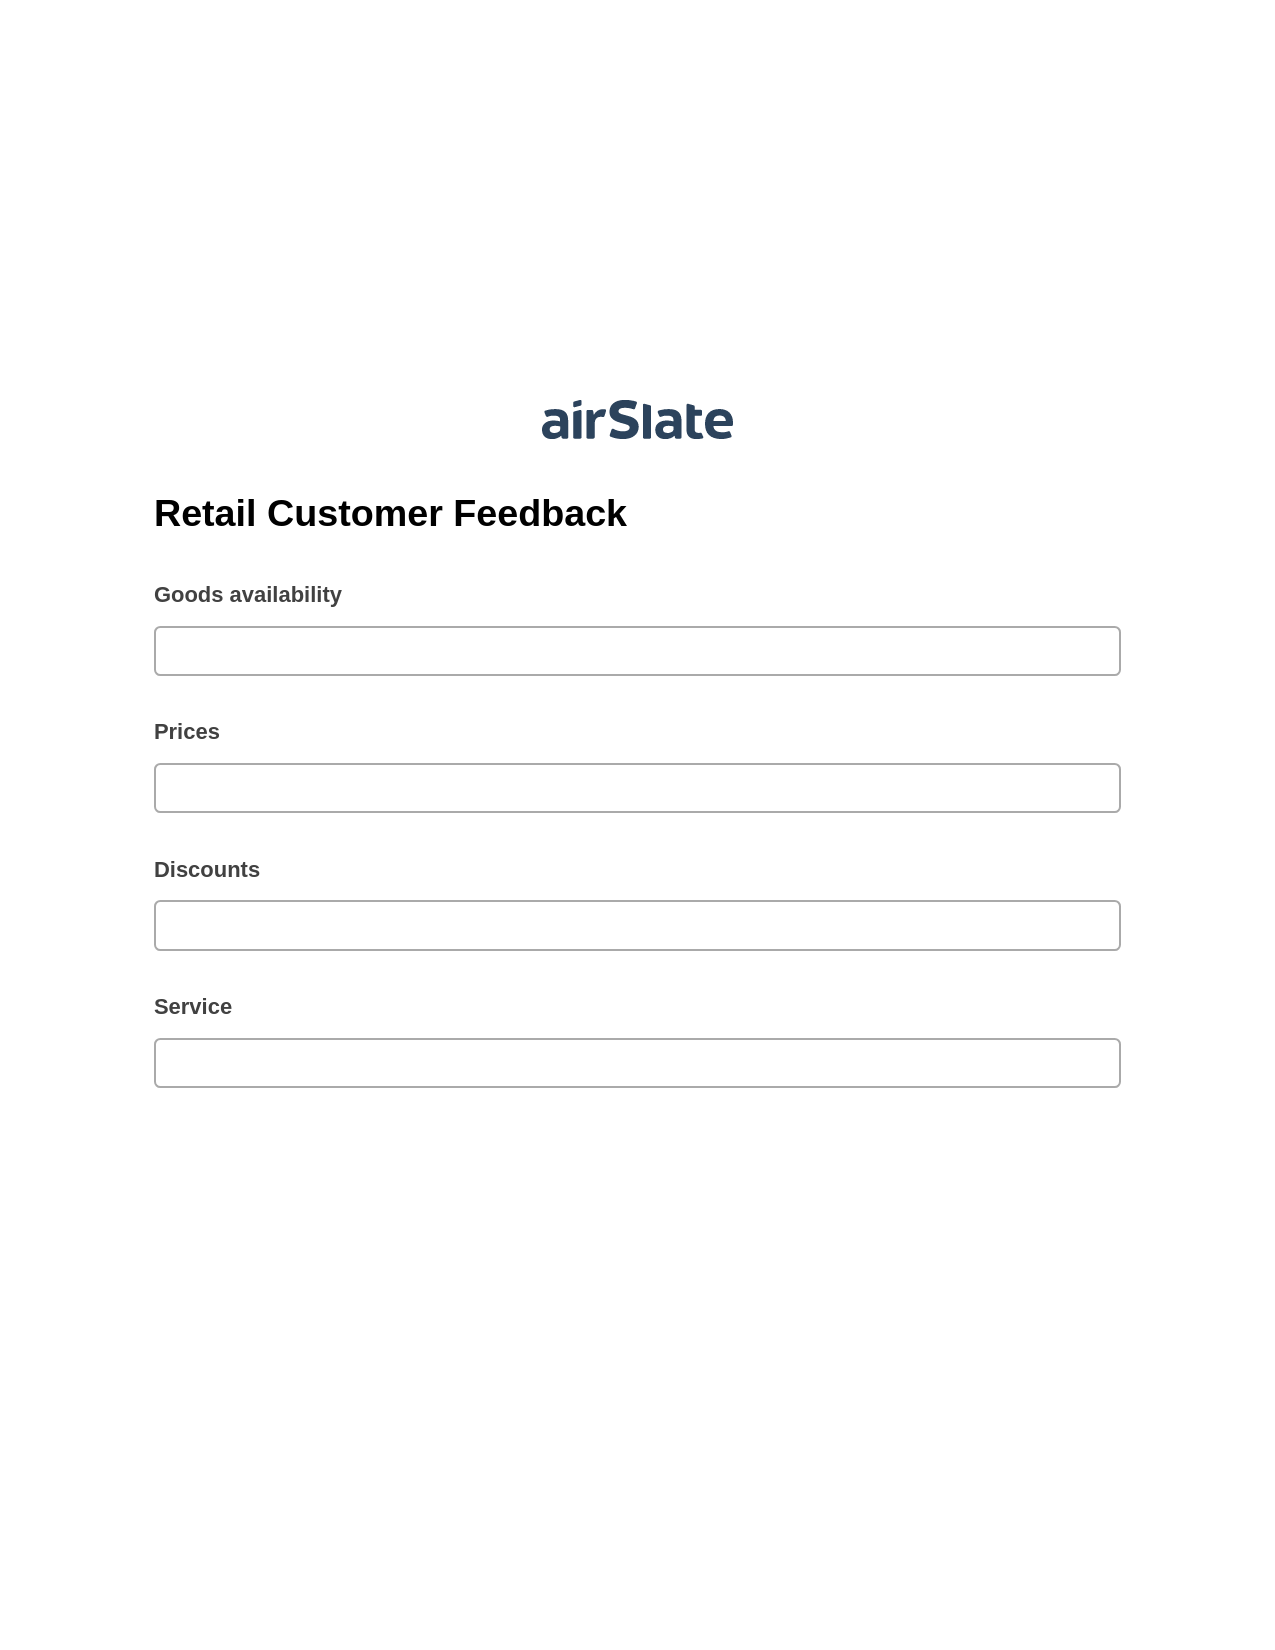 Retail Customer Feedback System Bot - Slack Two-Way Binding Bot, Create slate from another Flow Bot, Export to Excel 365 Bot